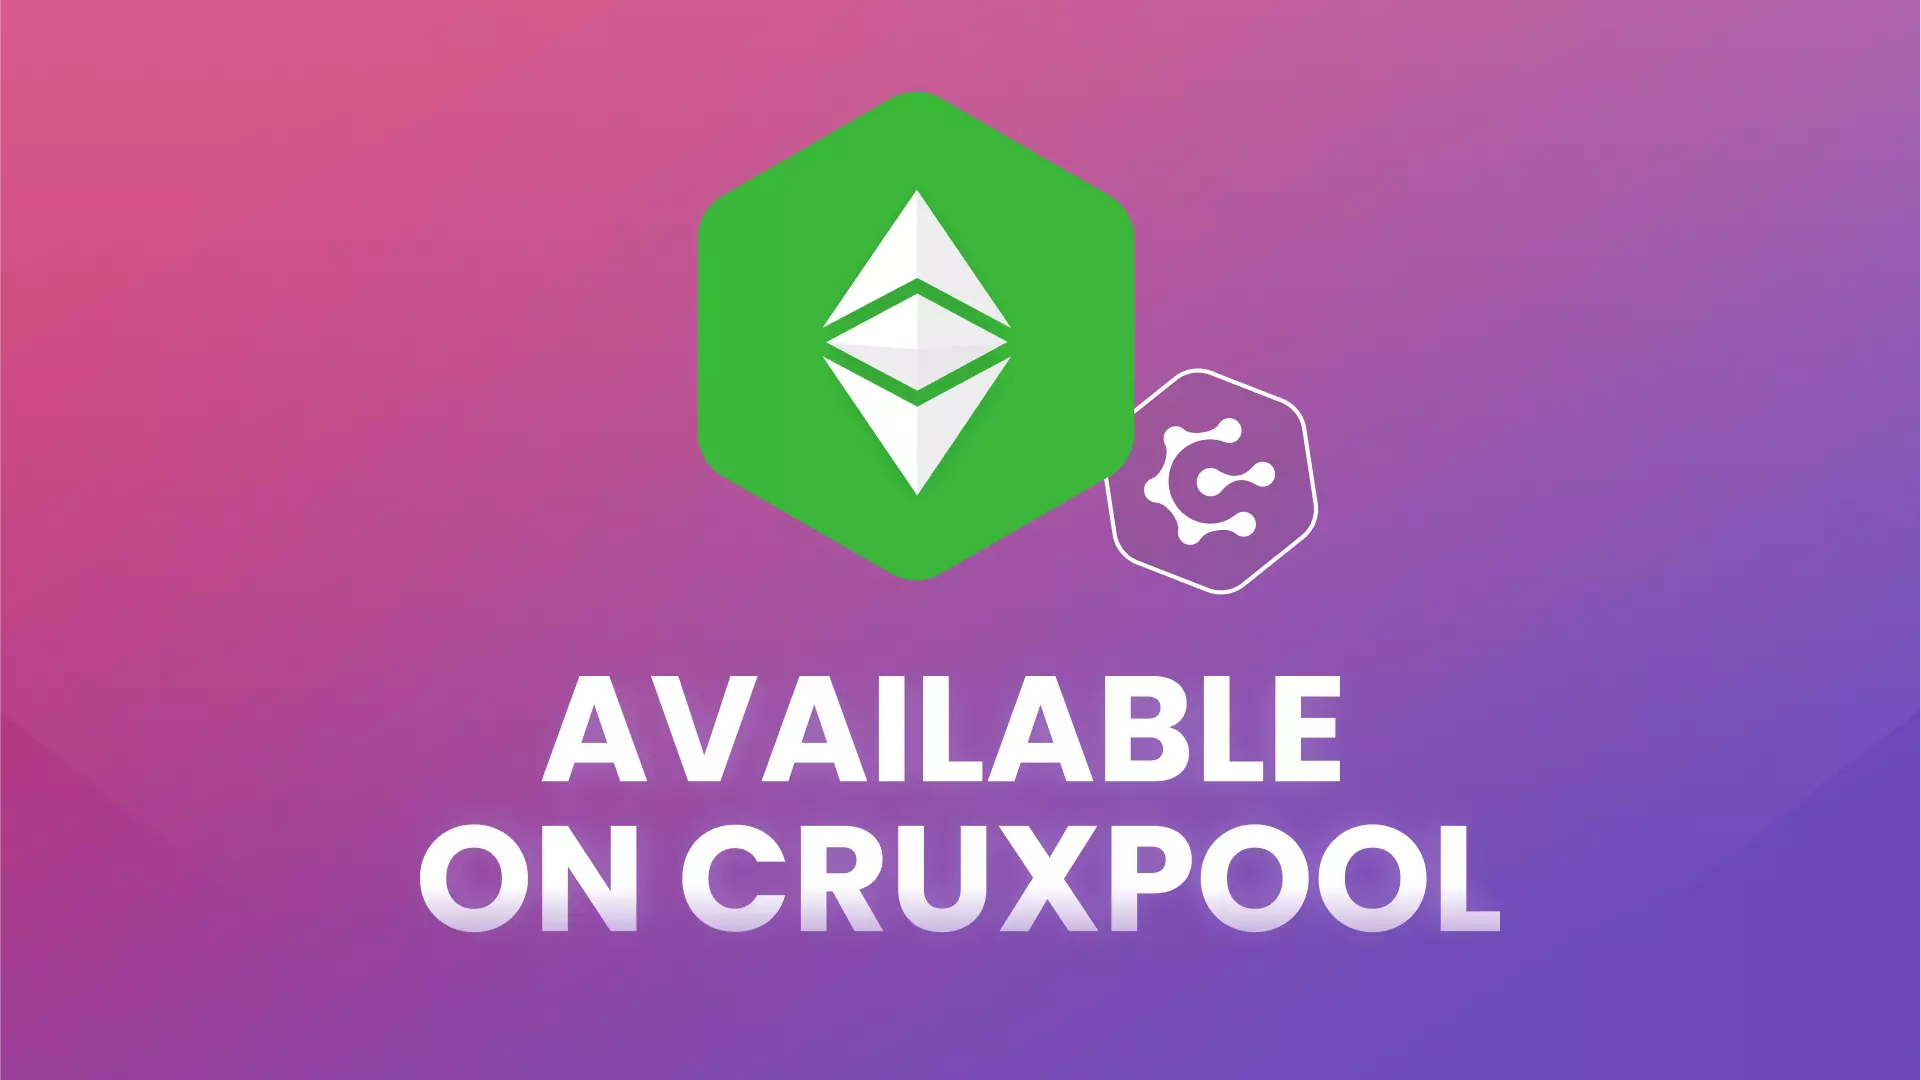 Ethereum Classic is available on Cruxpool